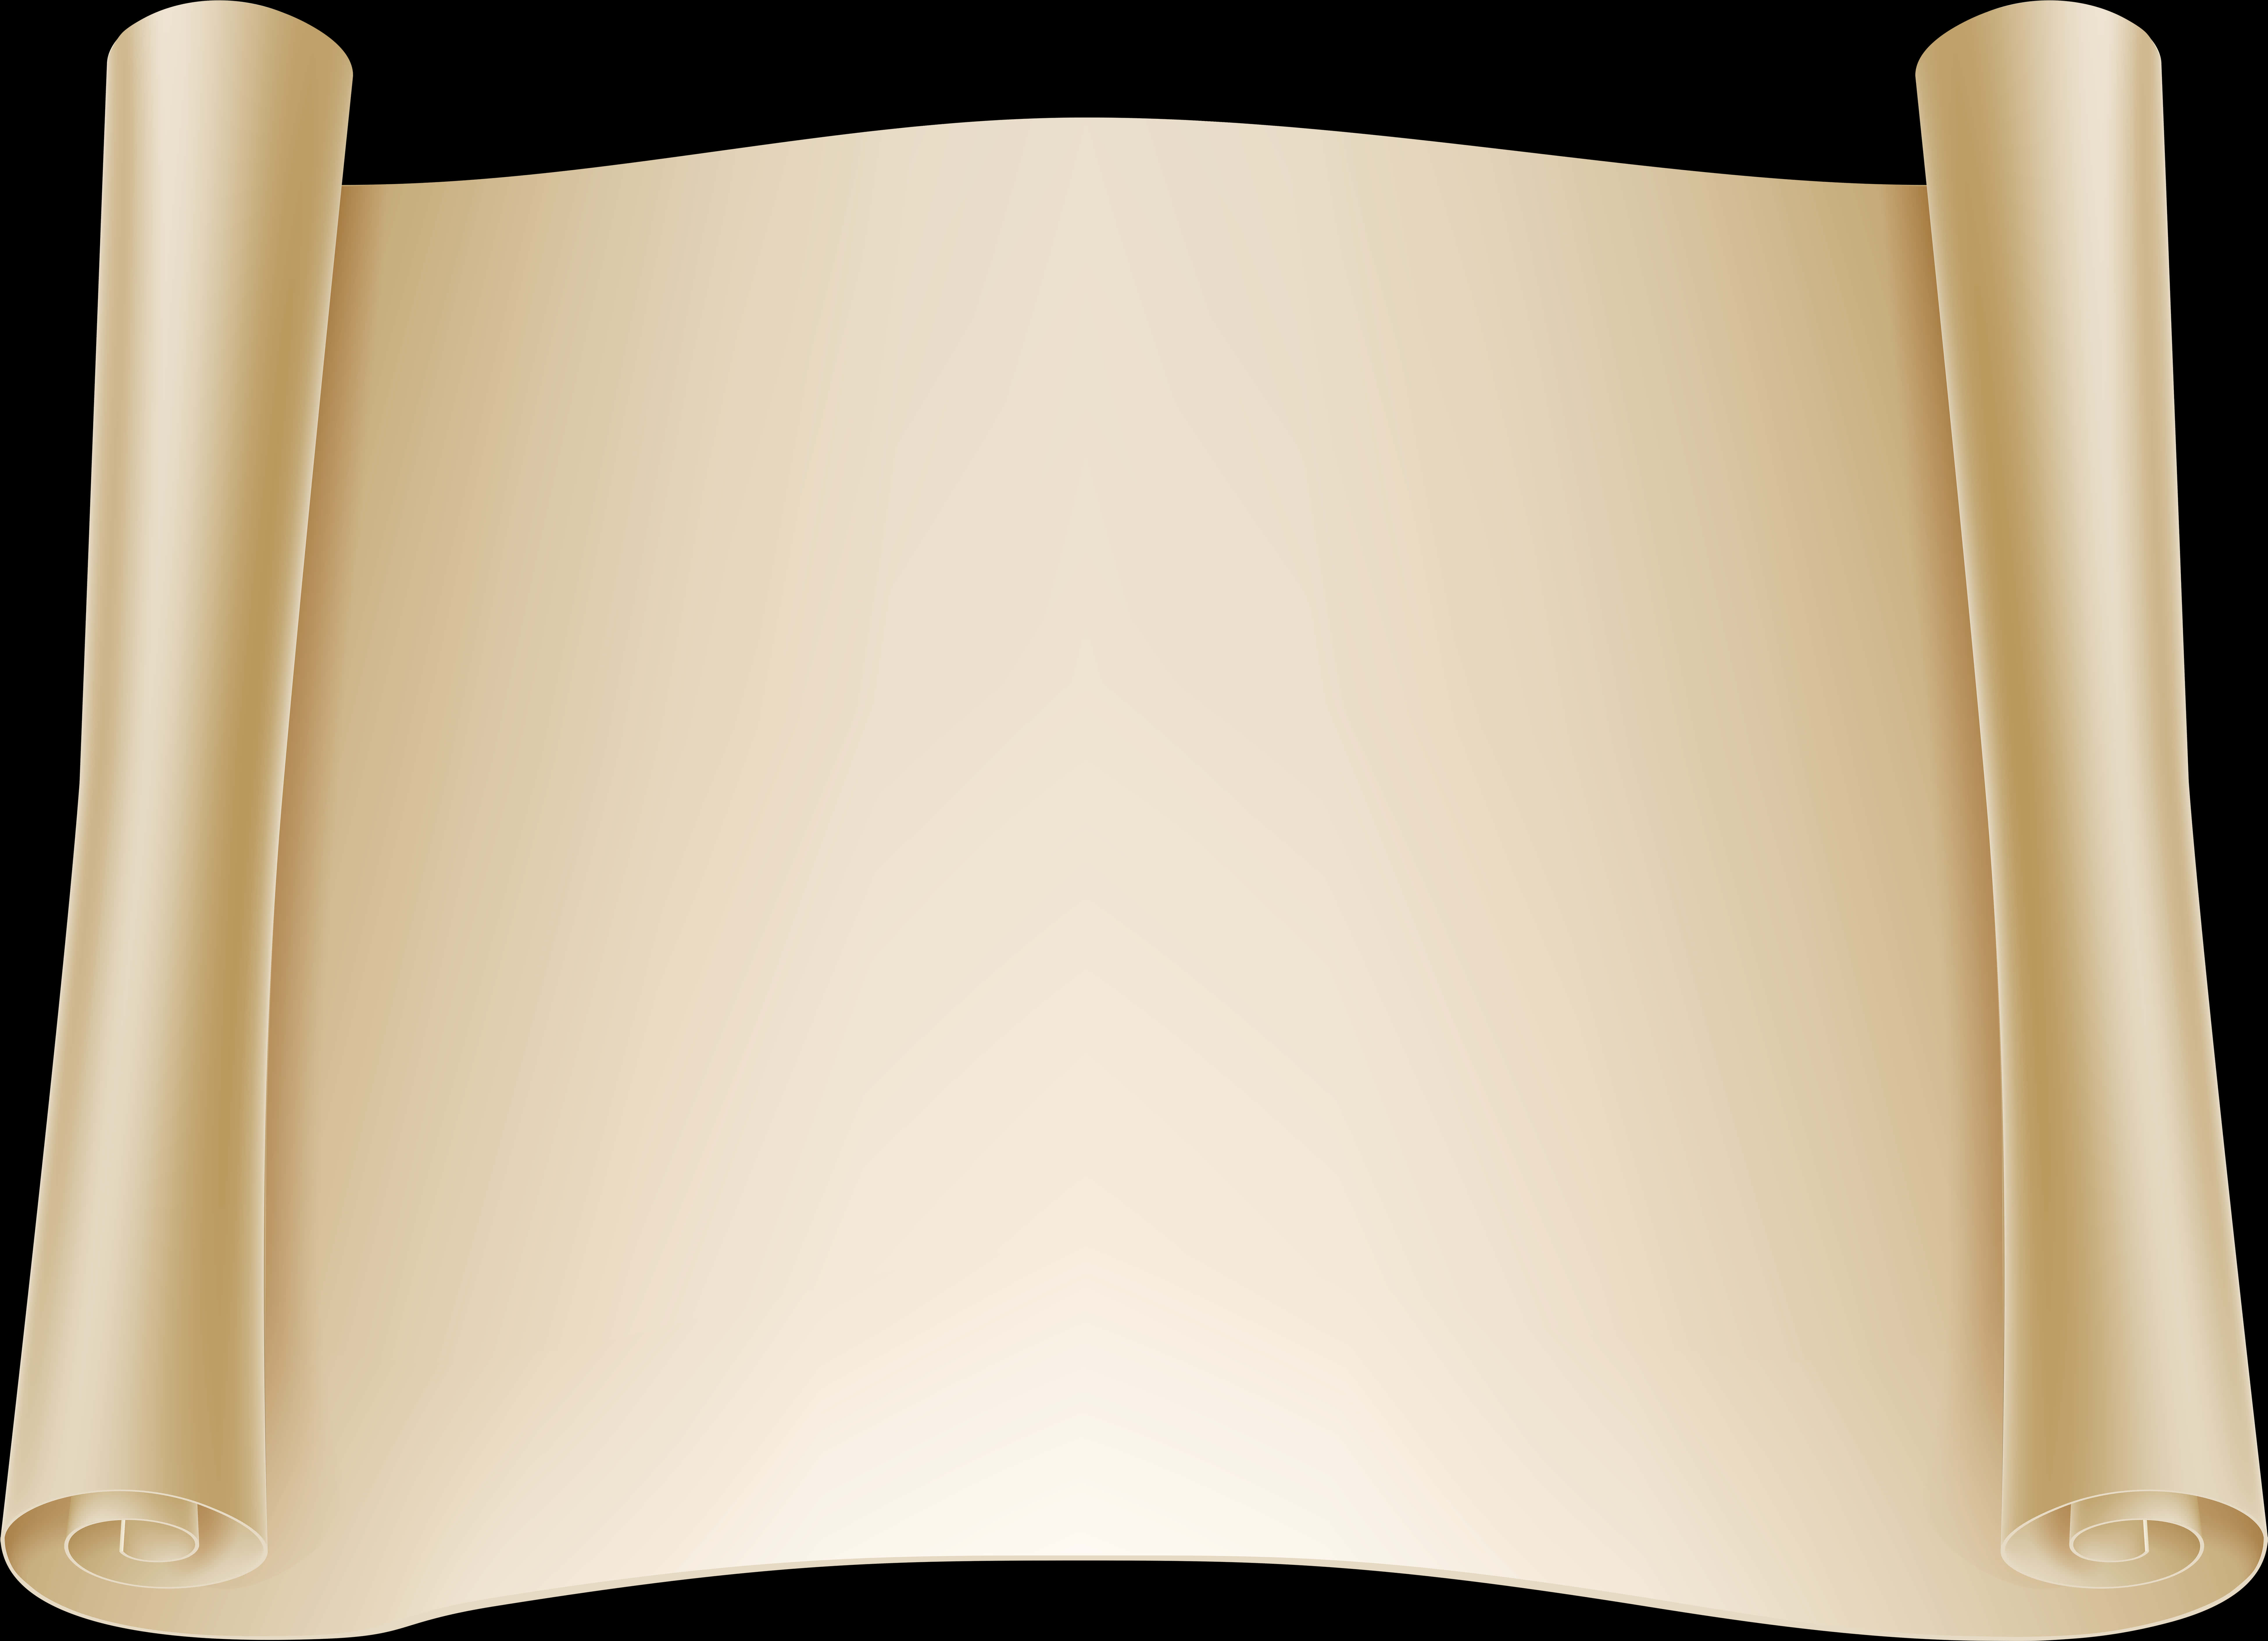 Ancient Scroll Graphic PNG image